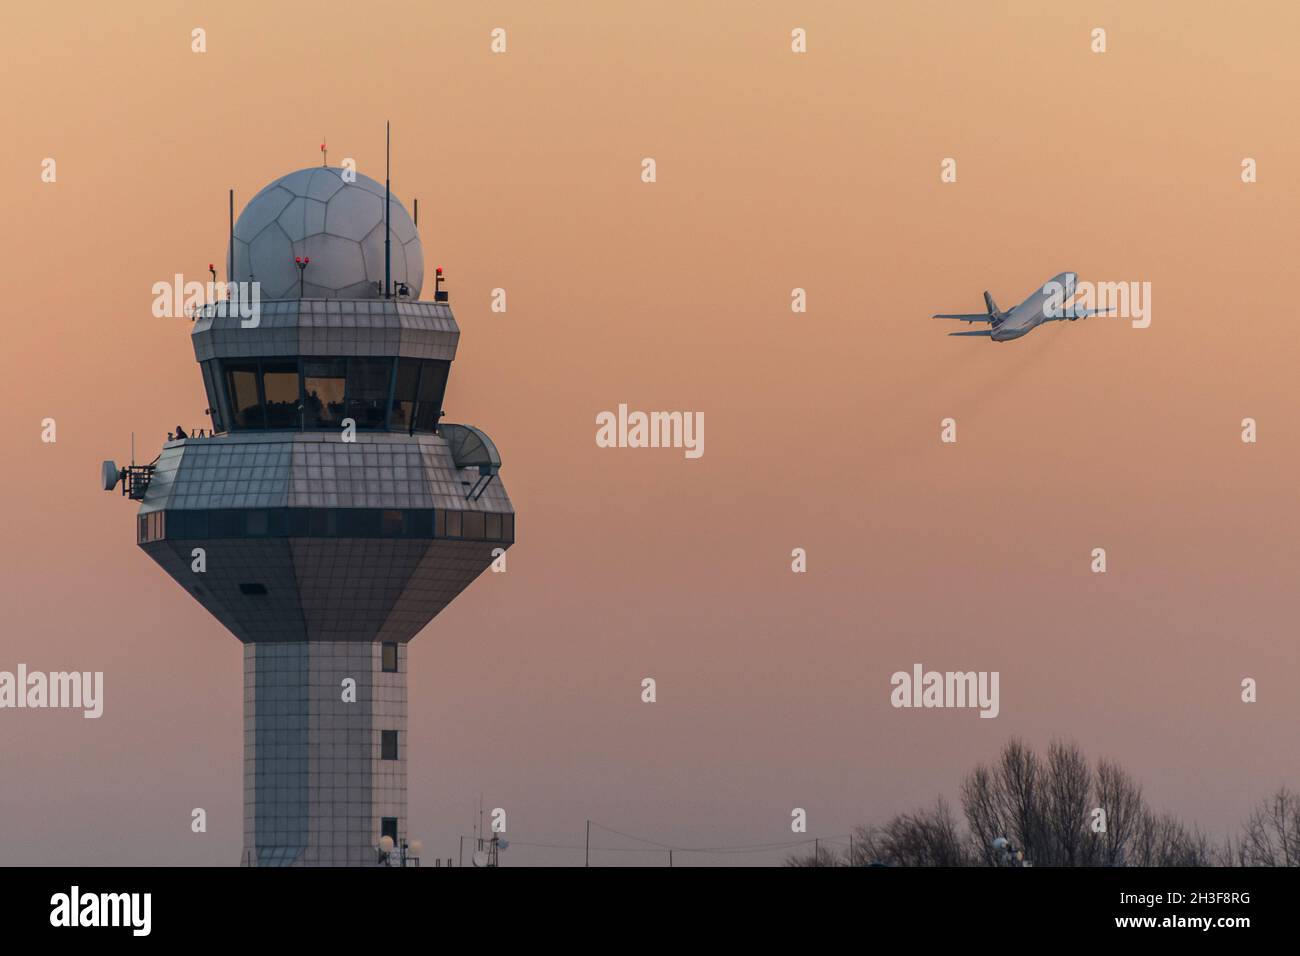 Warsaw, Poland - December 28, 2013: Late afternoon air traffic control tower and start of LOT Polish Airlines Boeing 737 jet plane at Chopin Airport Stock Photo